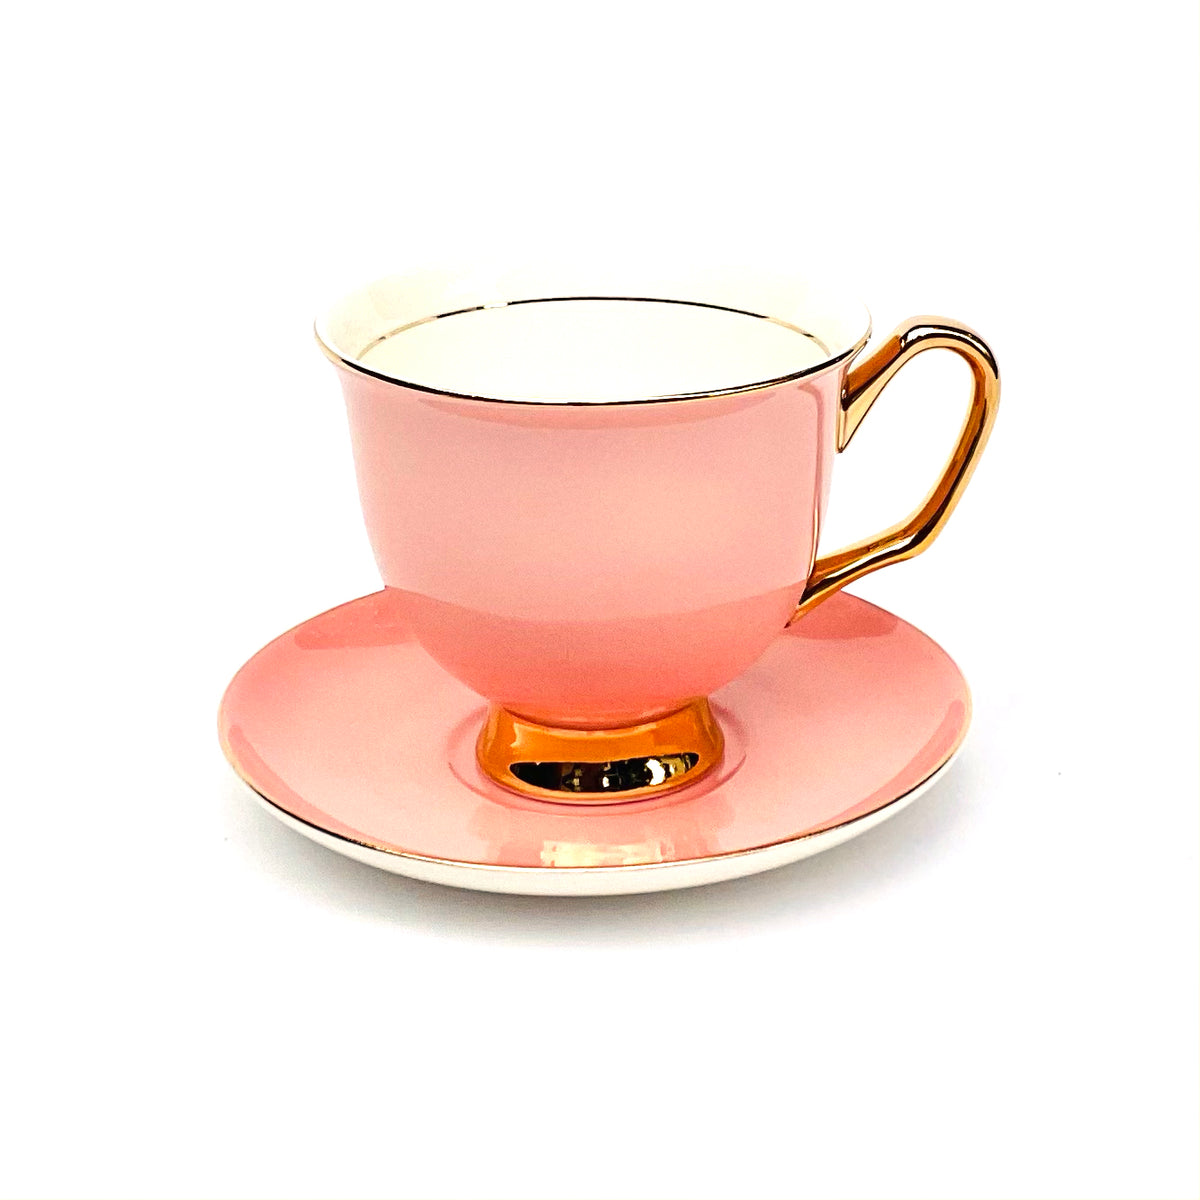 XL Pale Pink Teacup and Saucer